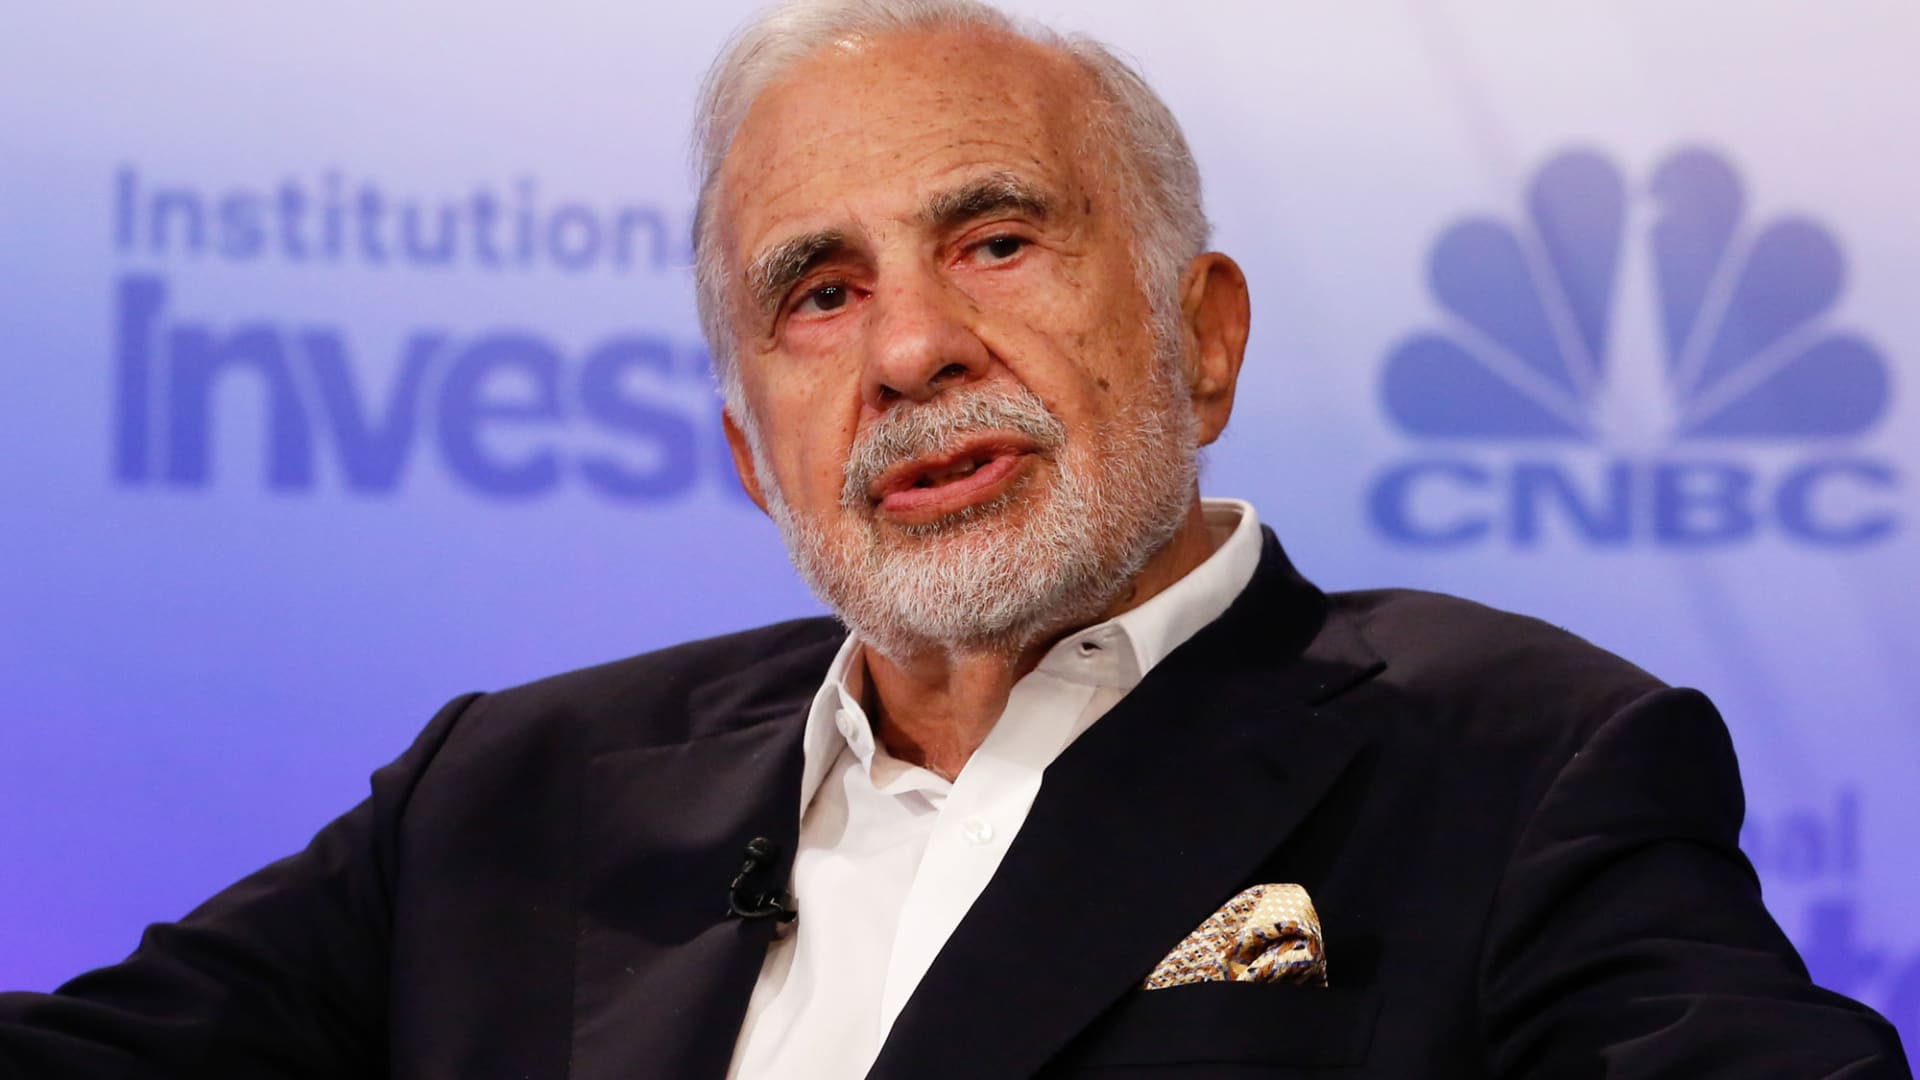 Carl Icahn's company stock falls as much as 20% after prosecutors seek financial information